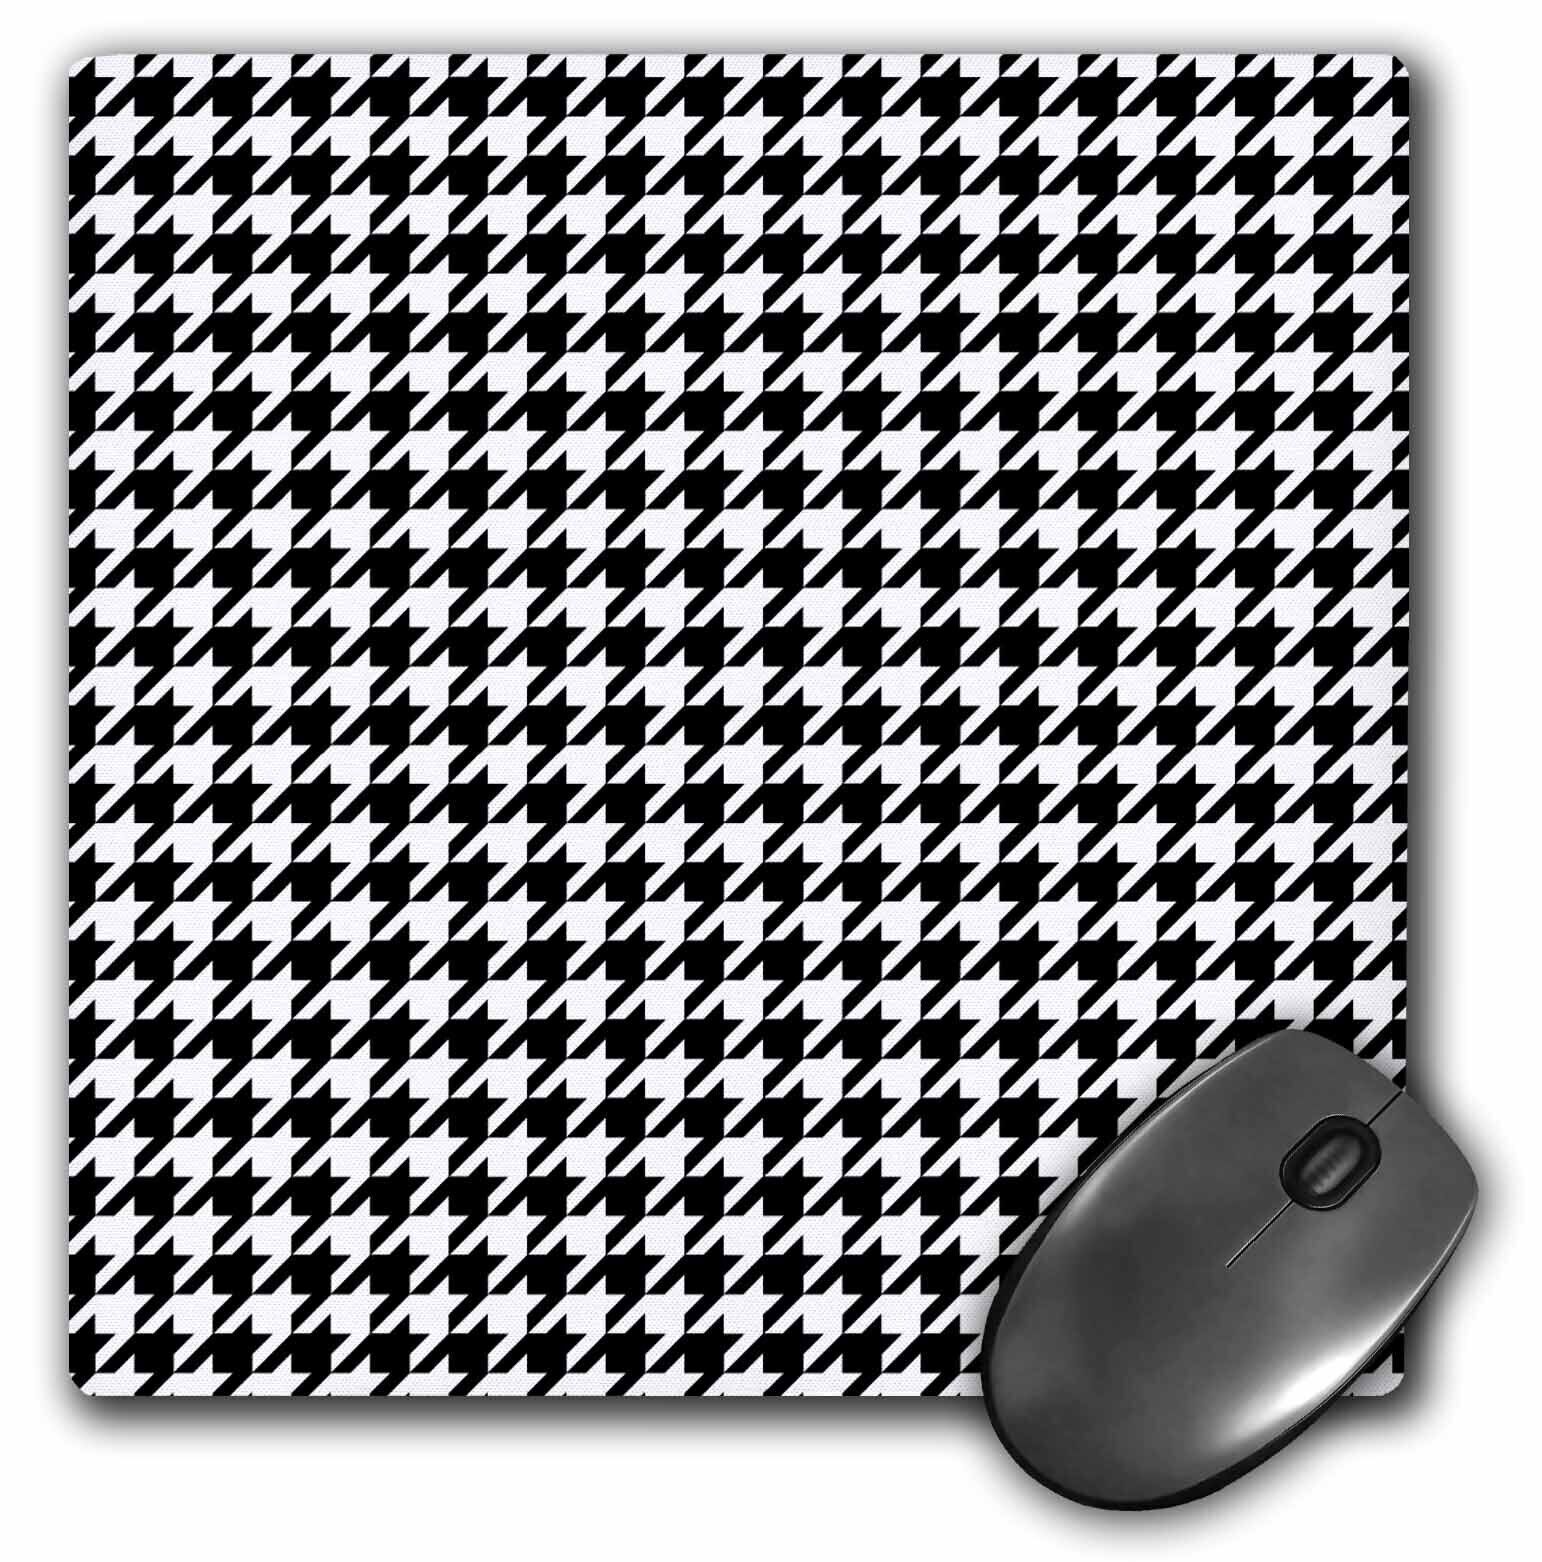 3dRose Black and White Houndstooth - Small MousePad